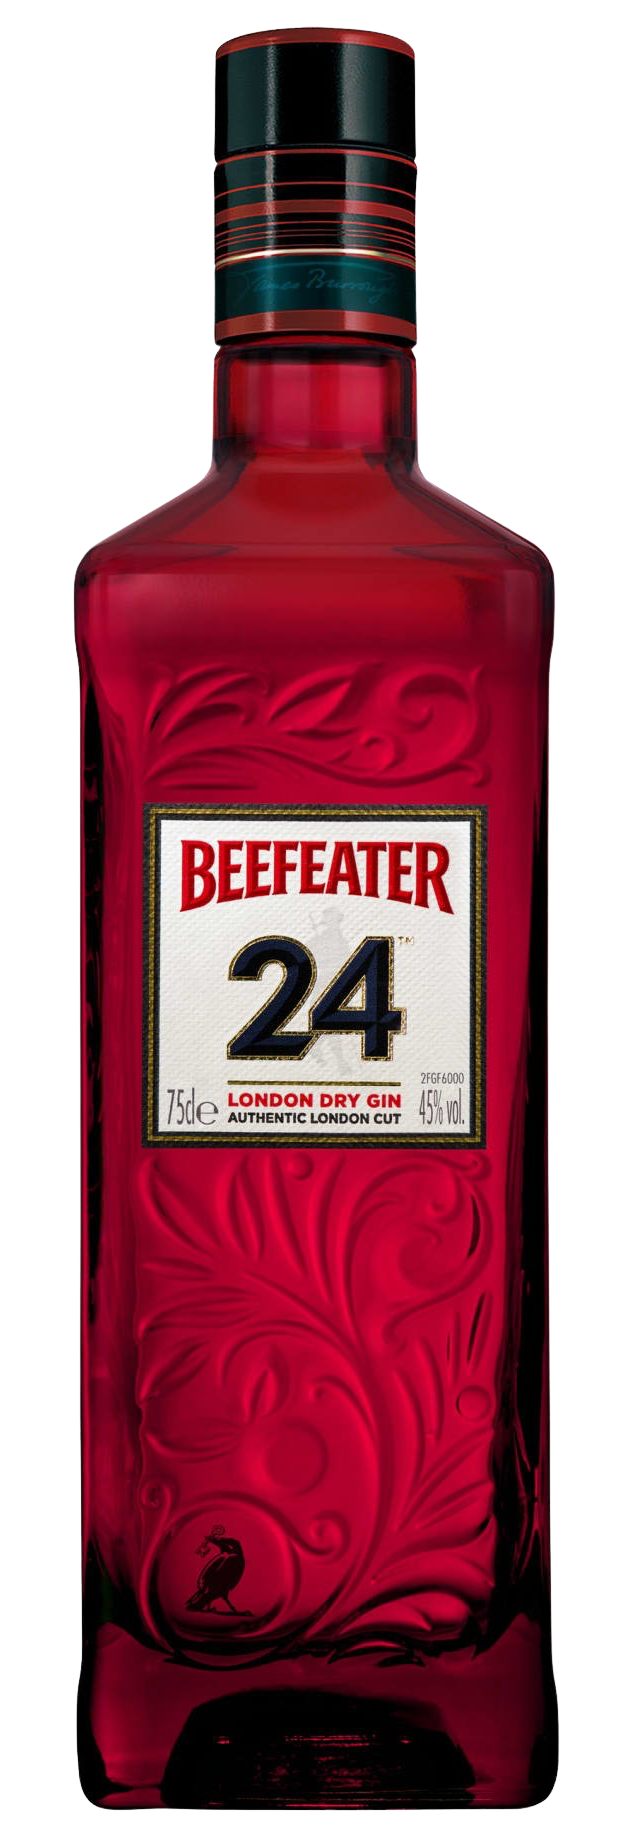 Beefeater 24 Dry London Gin